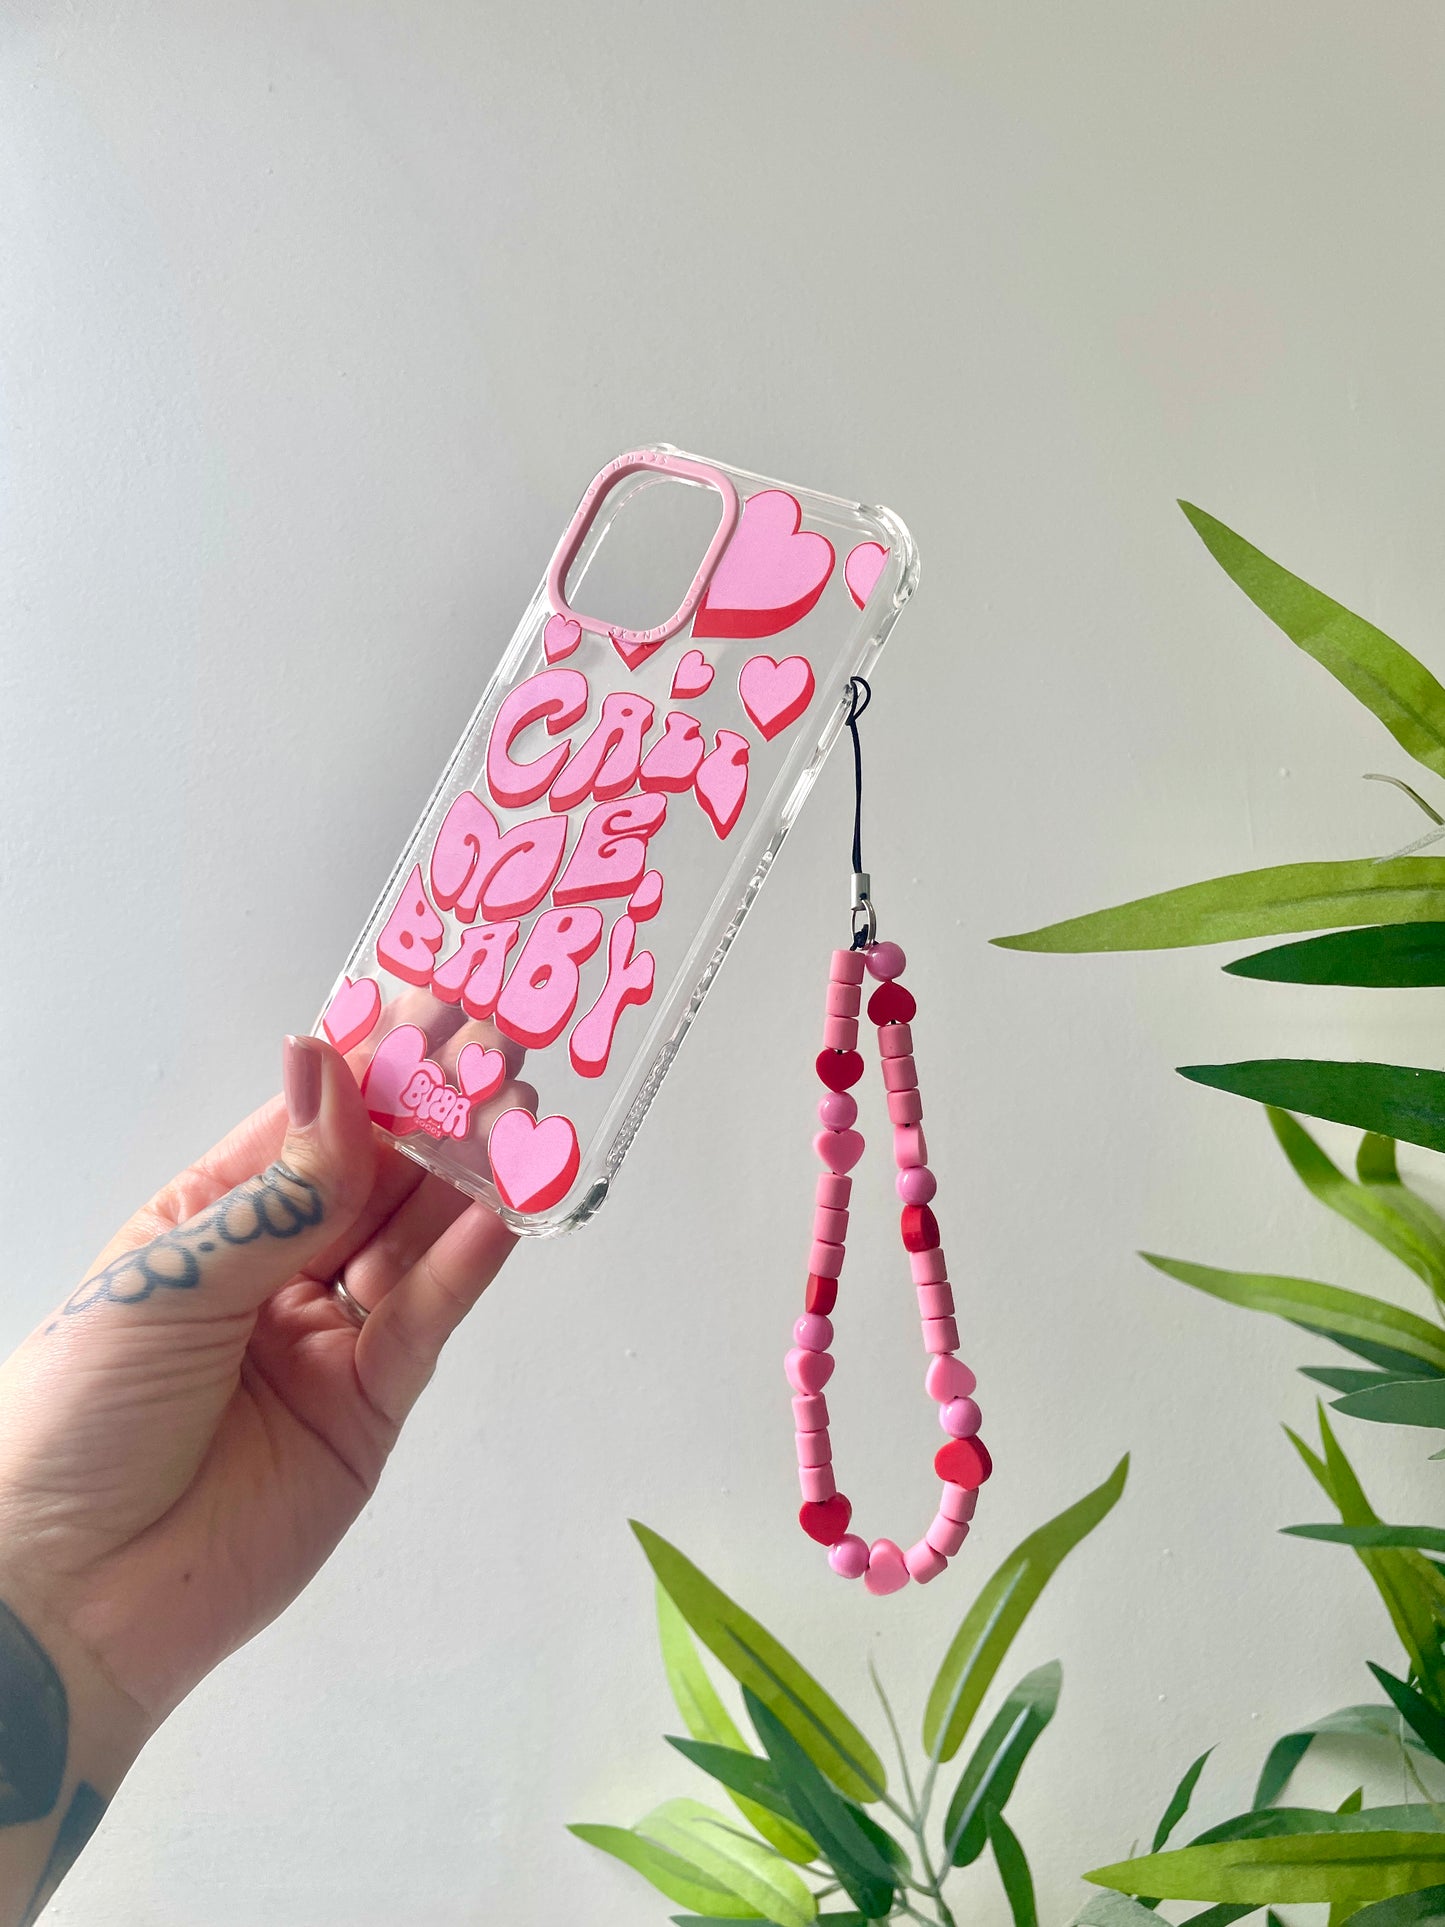 BUBA GOODS x SKINNYDIP limited edition pink and red hearts mobile phone charm strap